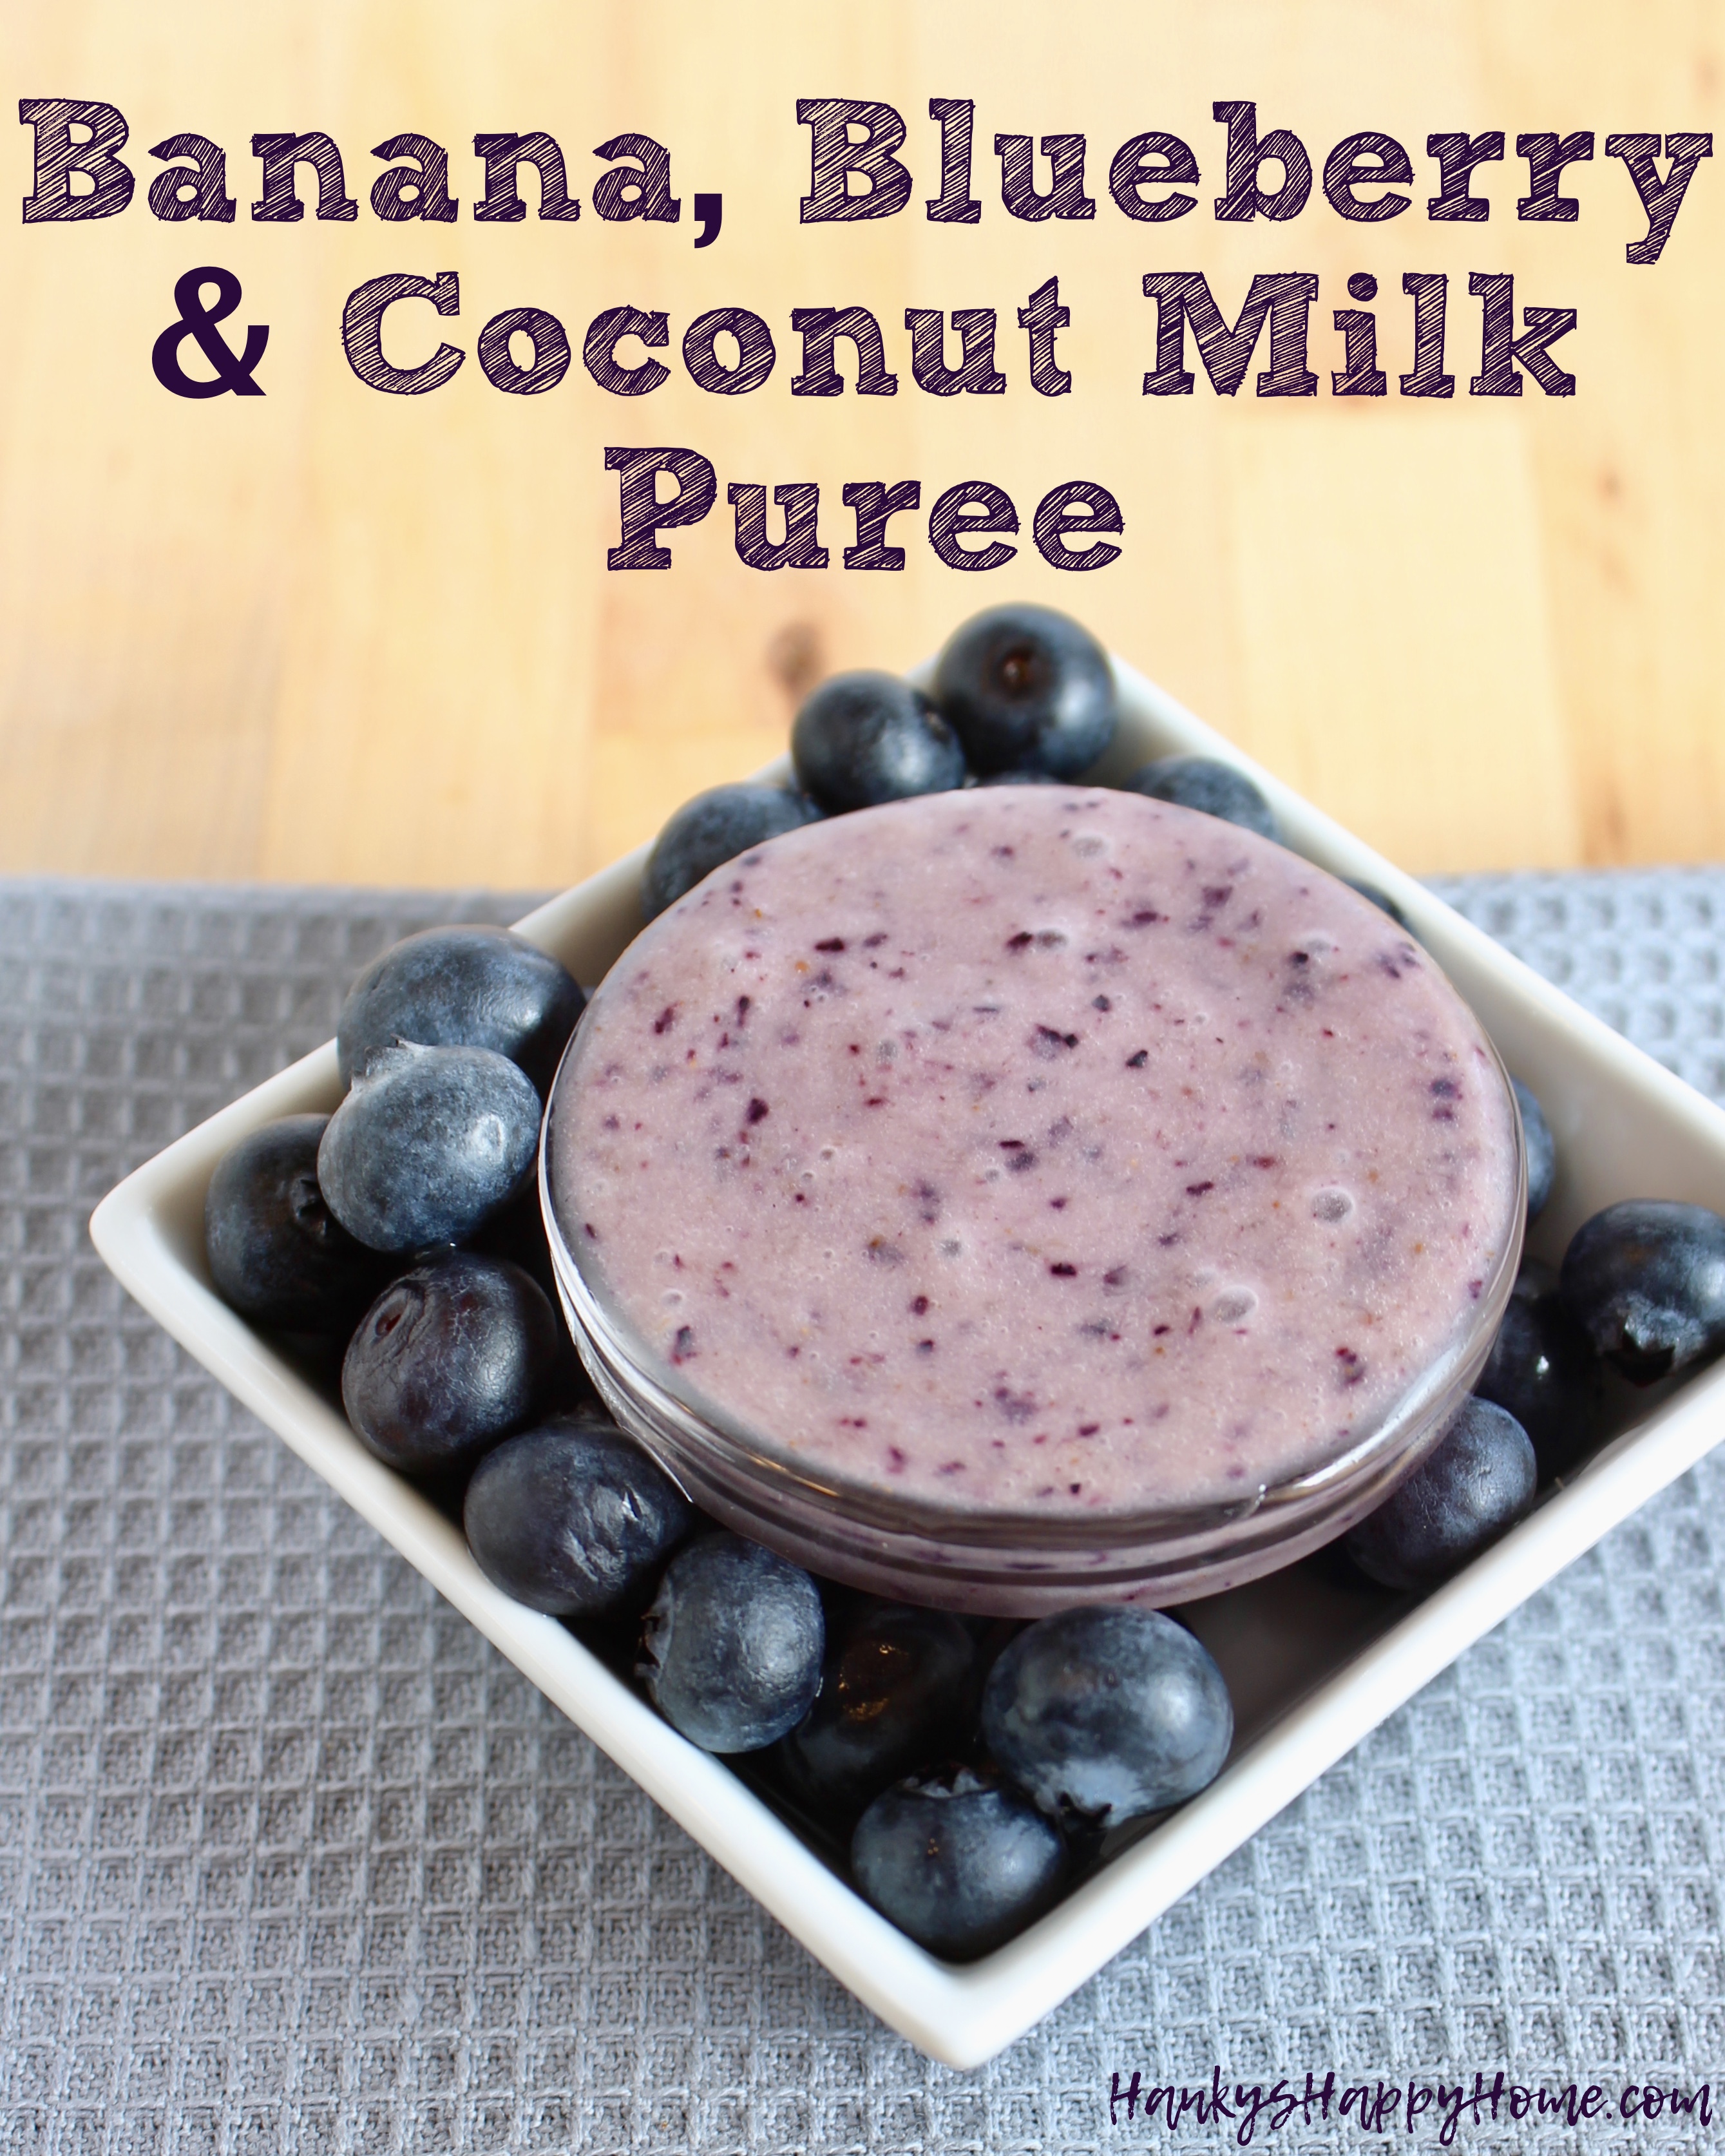 This Banana, Blueberry & Coconut Milk Puree is quick, easy & requires no cooking whatever!